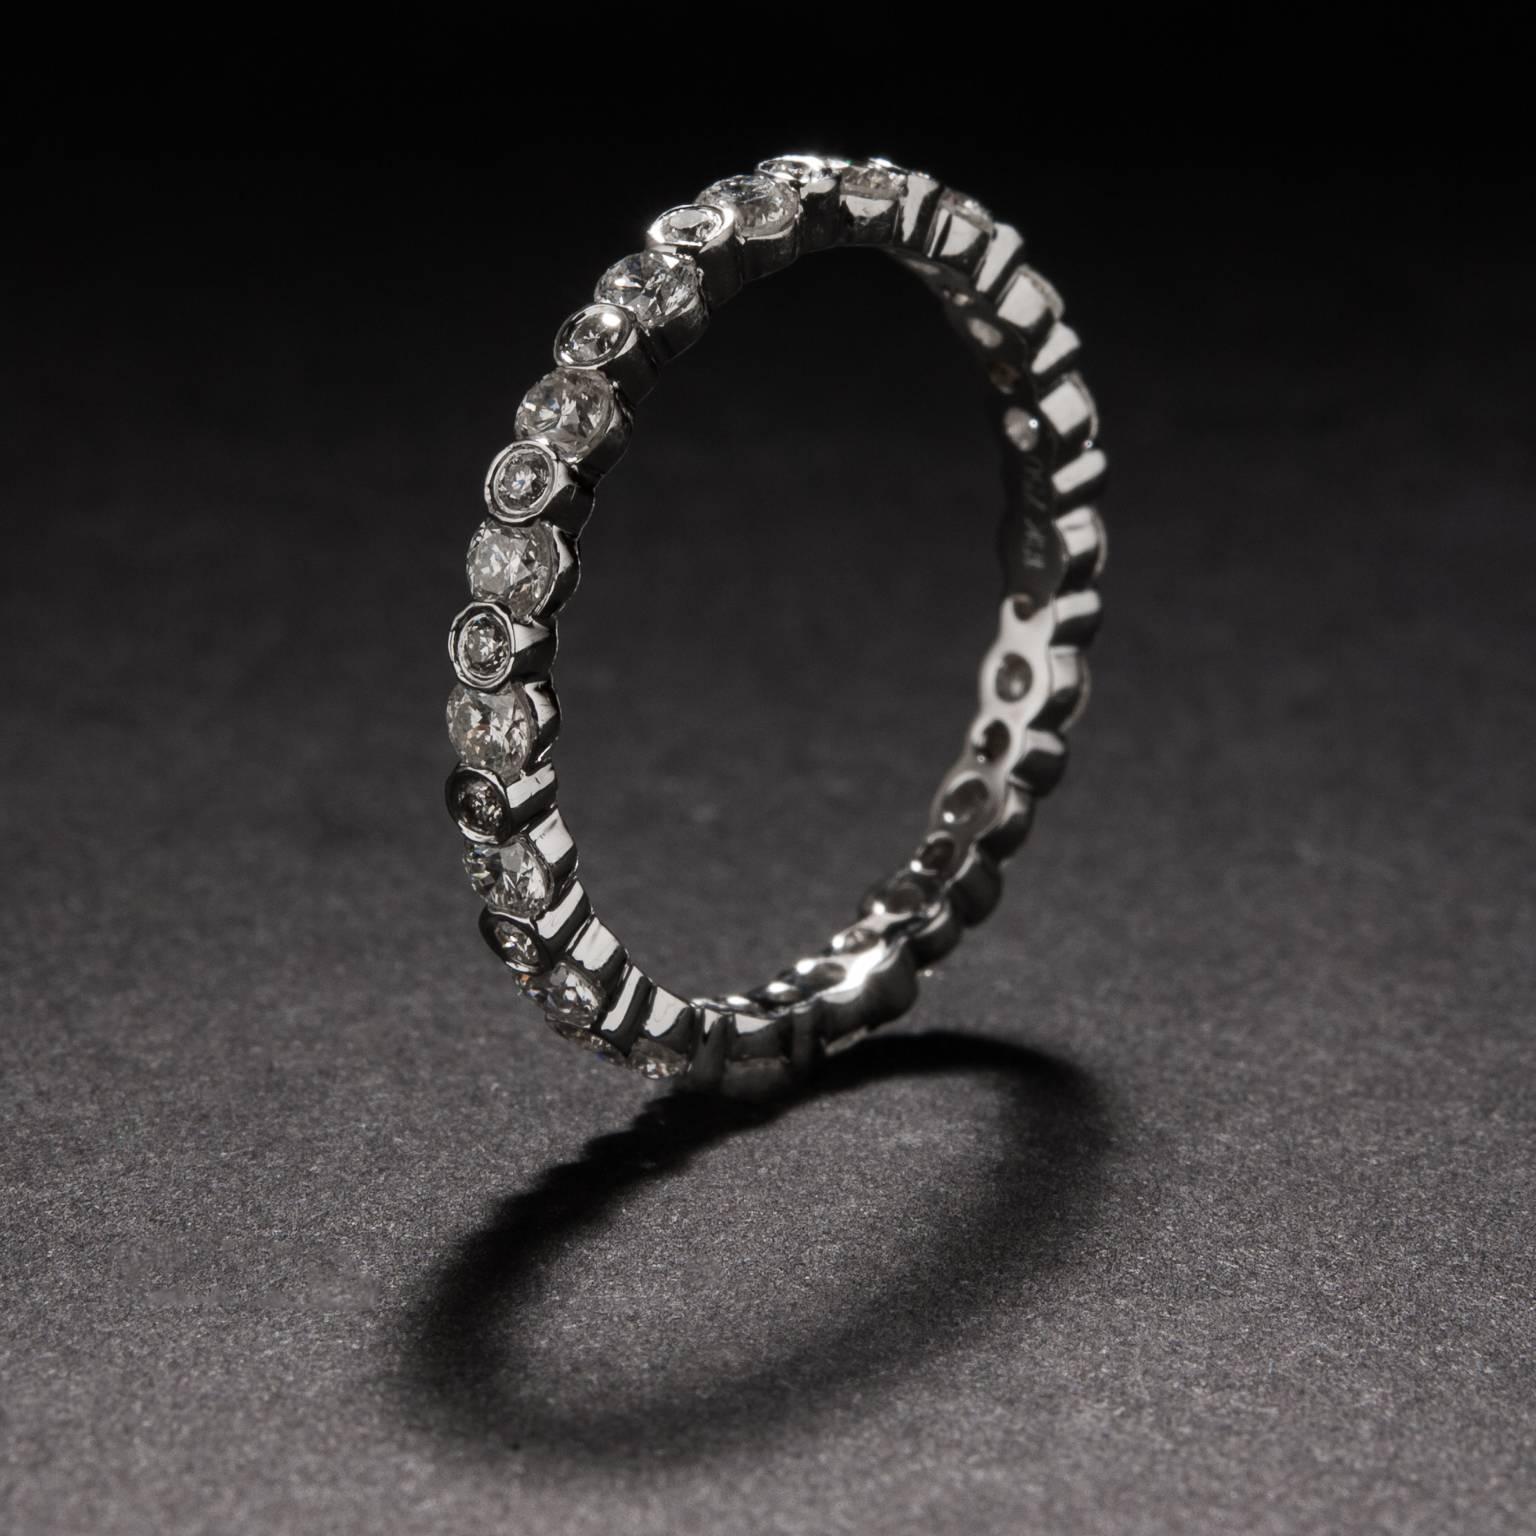 An elegant and eye-catching eternity band with 1.10 total carats of diamond. This ring is crafted in 14k white gold and features alternating larger and smaller stones, with the bezel setting of the smaller stones creating a channel setting for the